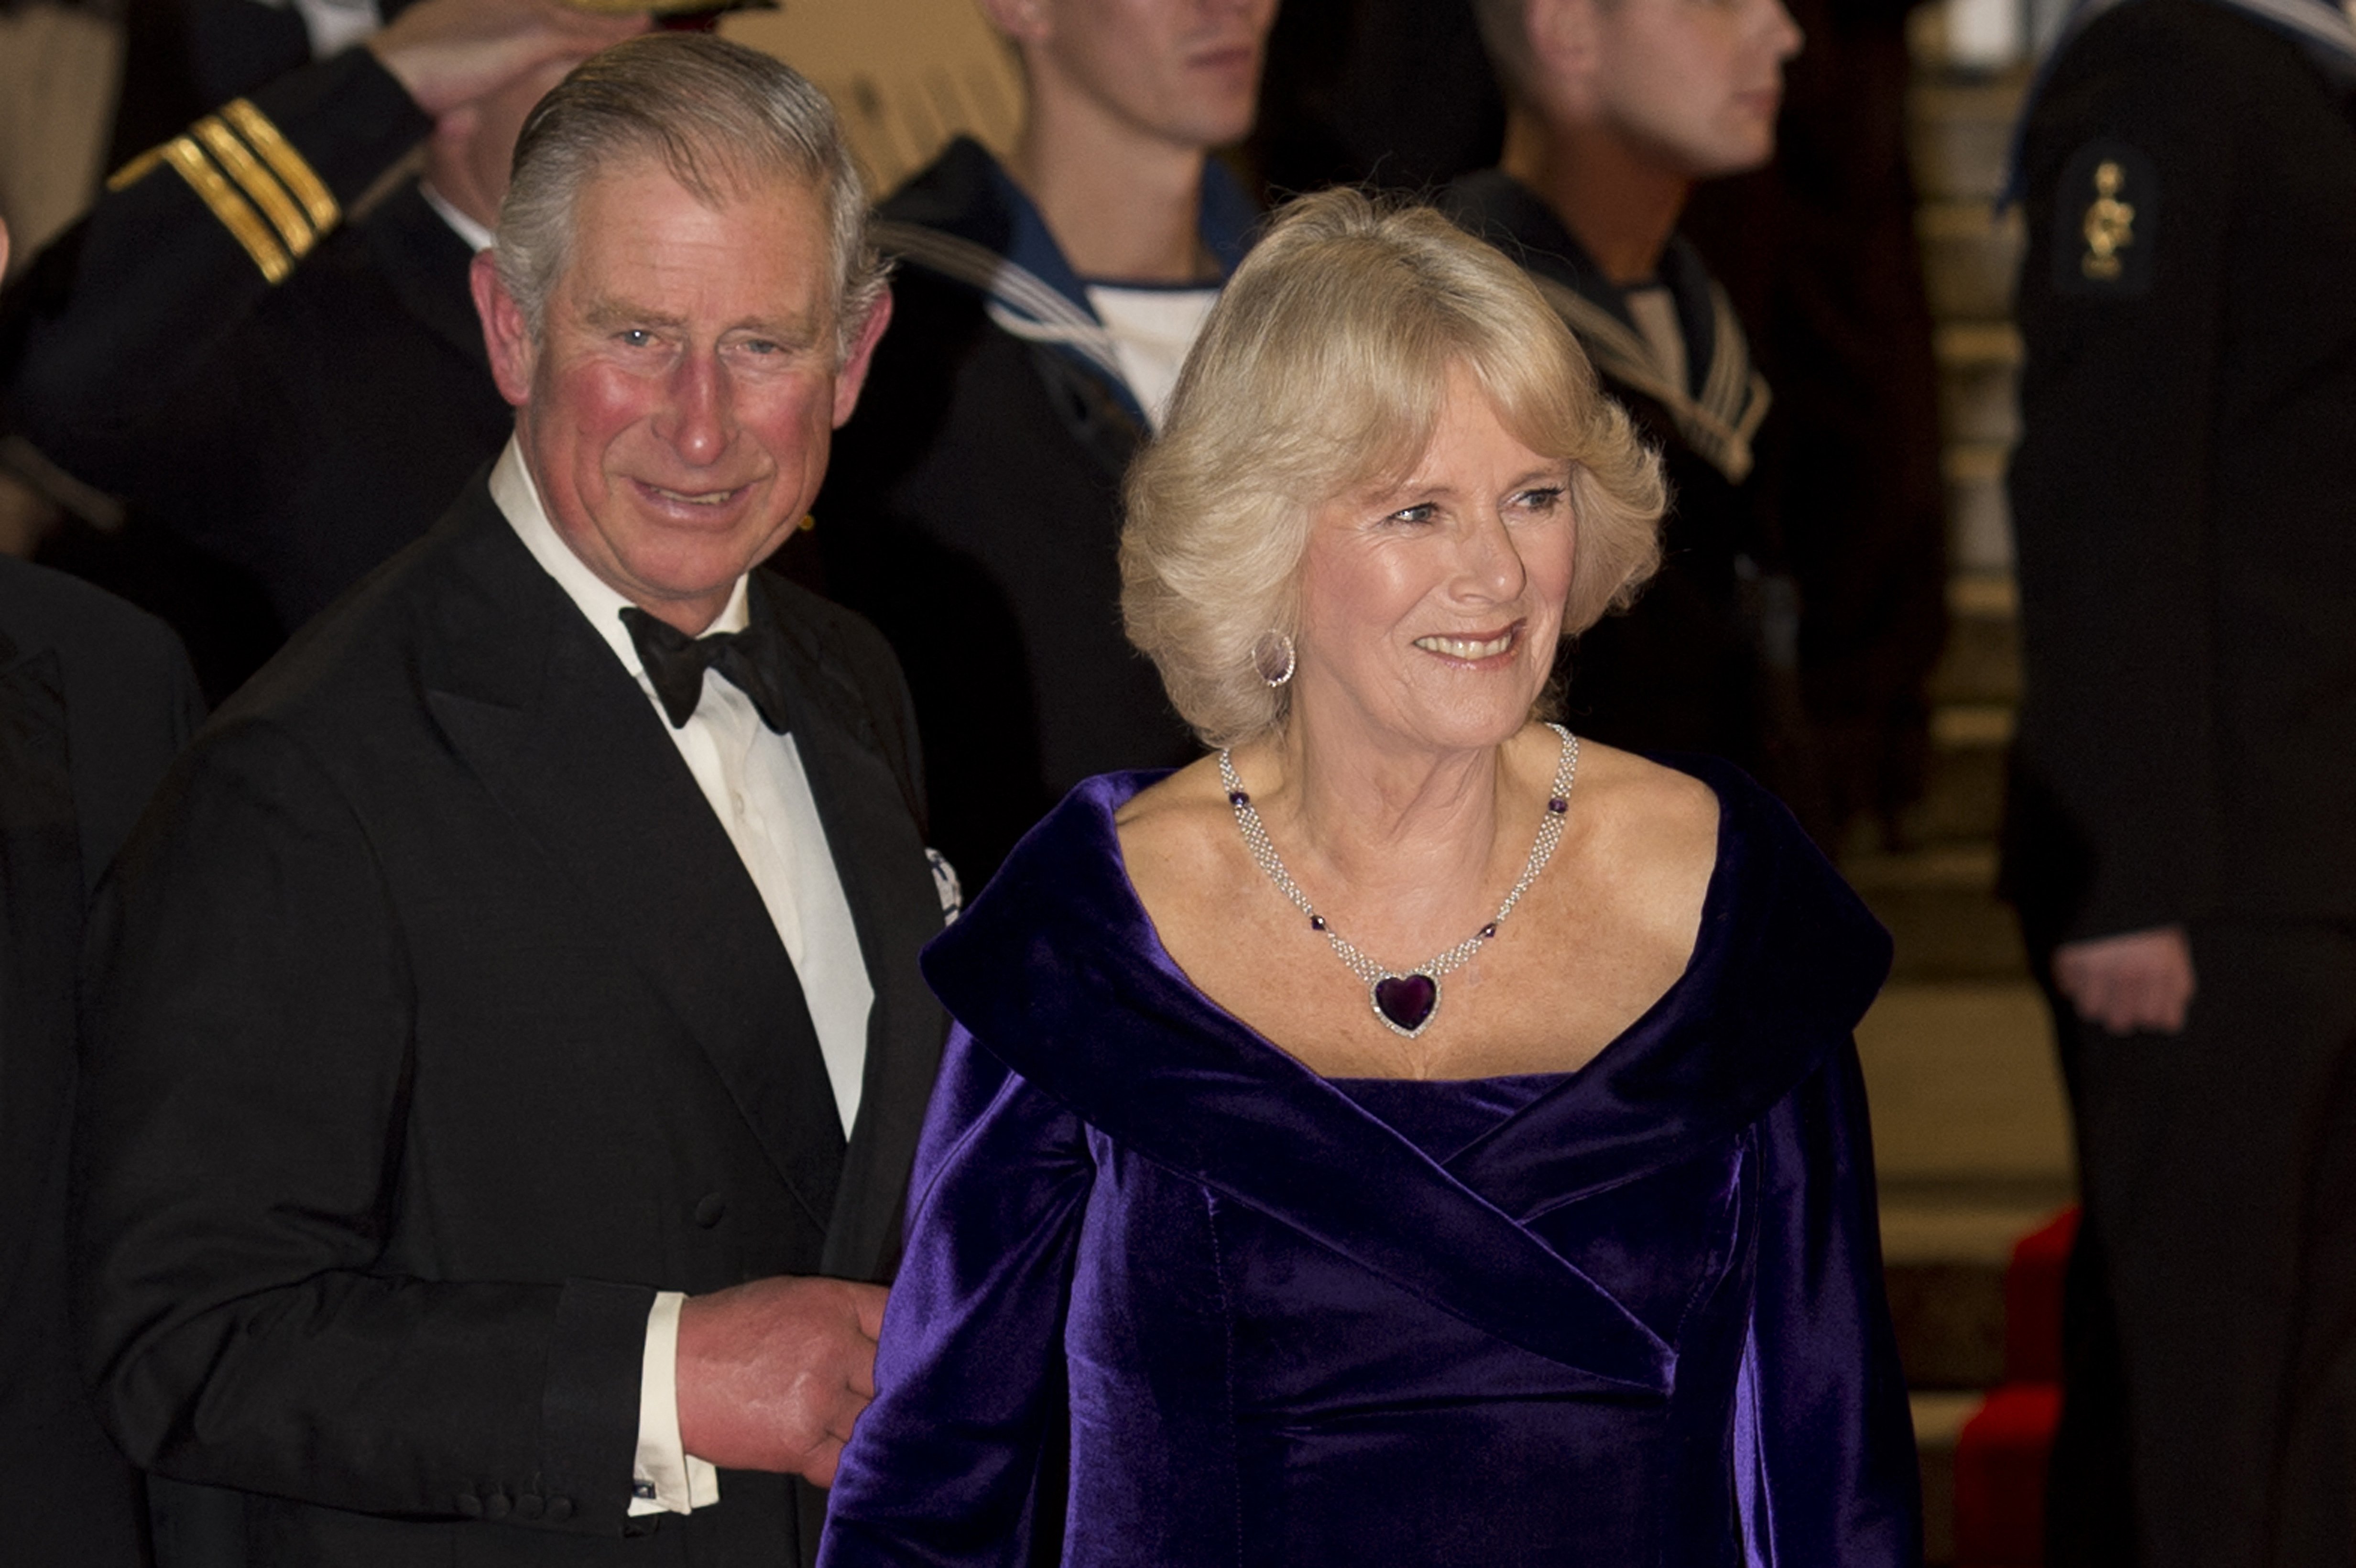 Prince Charles, now-king and Camila, arrive at the Royal Albert Hall in London on October 23, 2012.  | Source: Getty Images